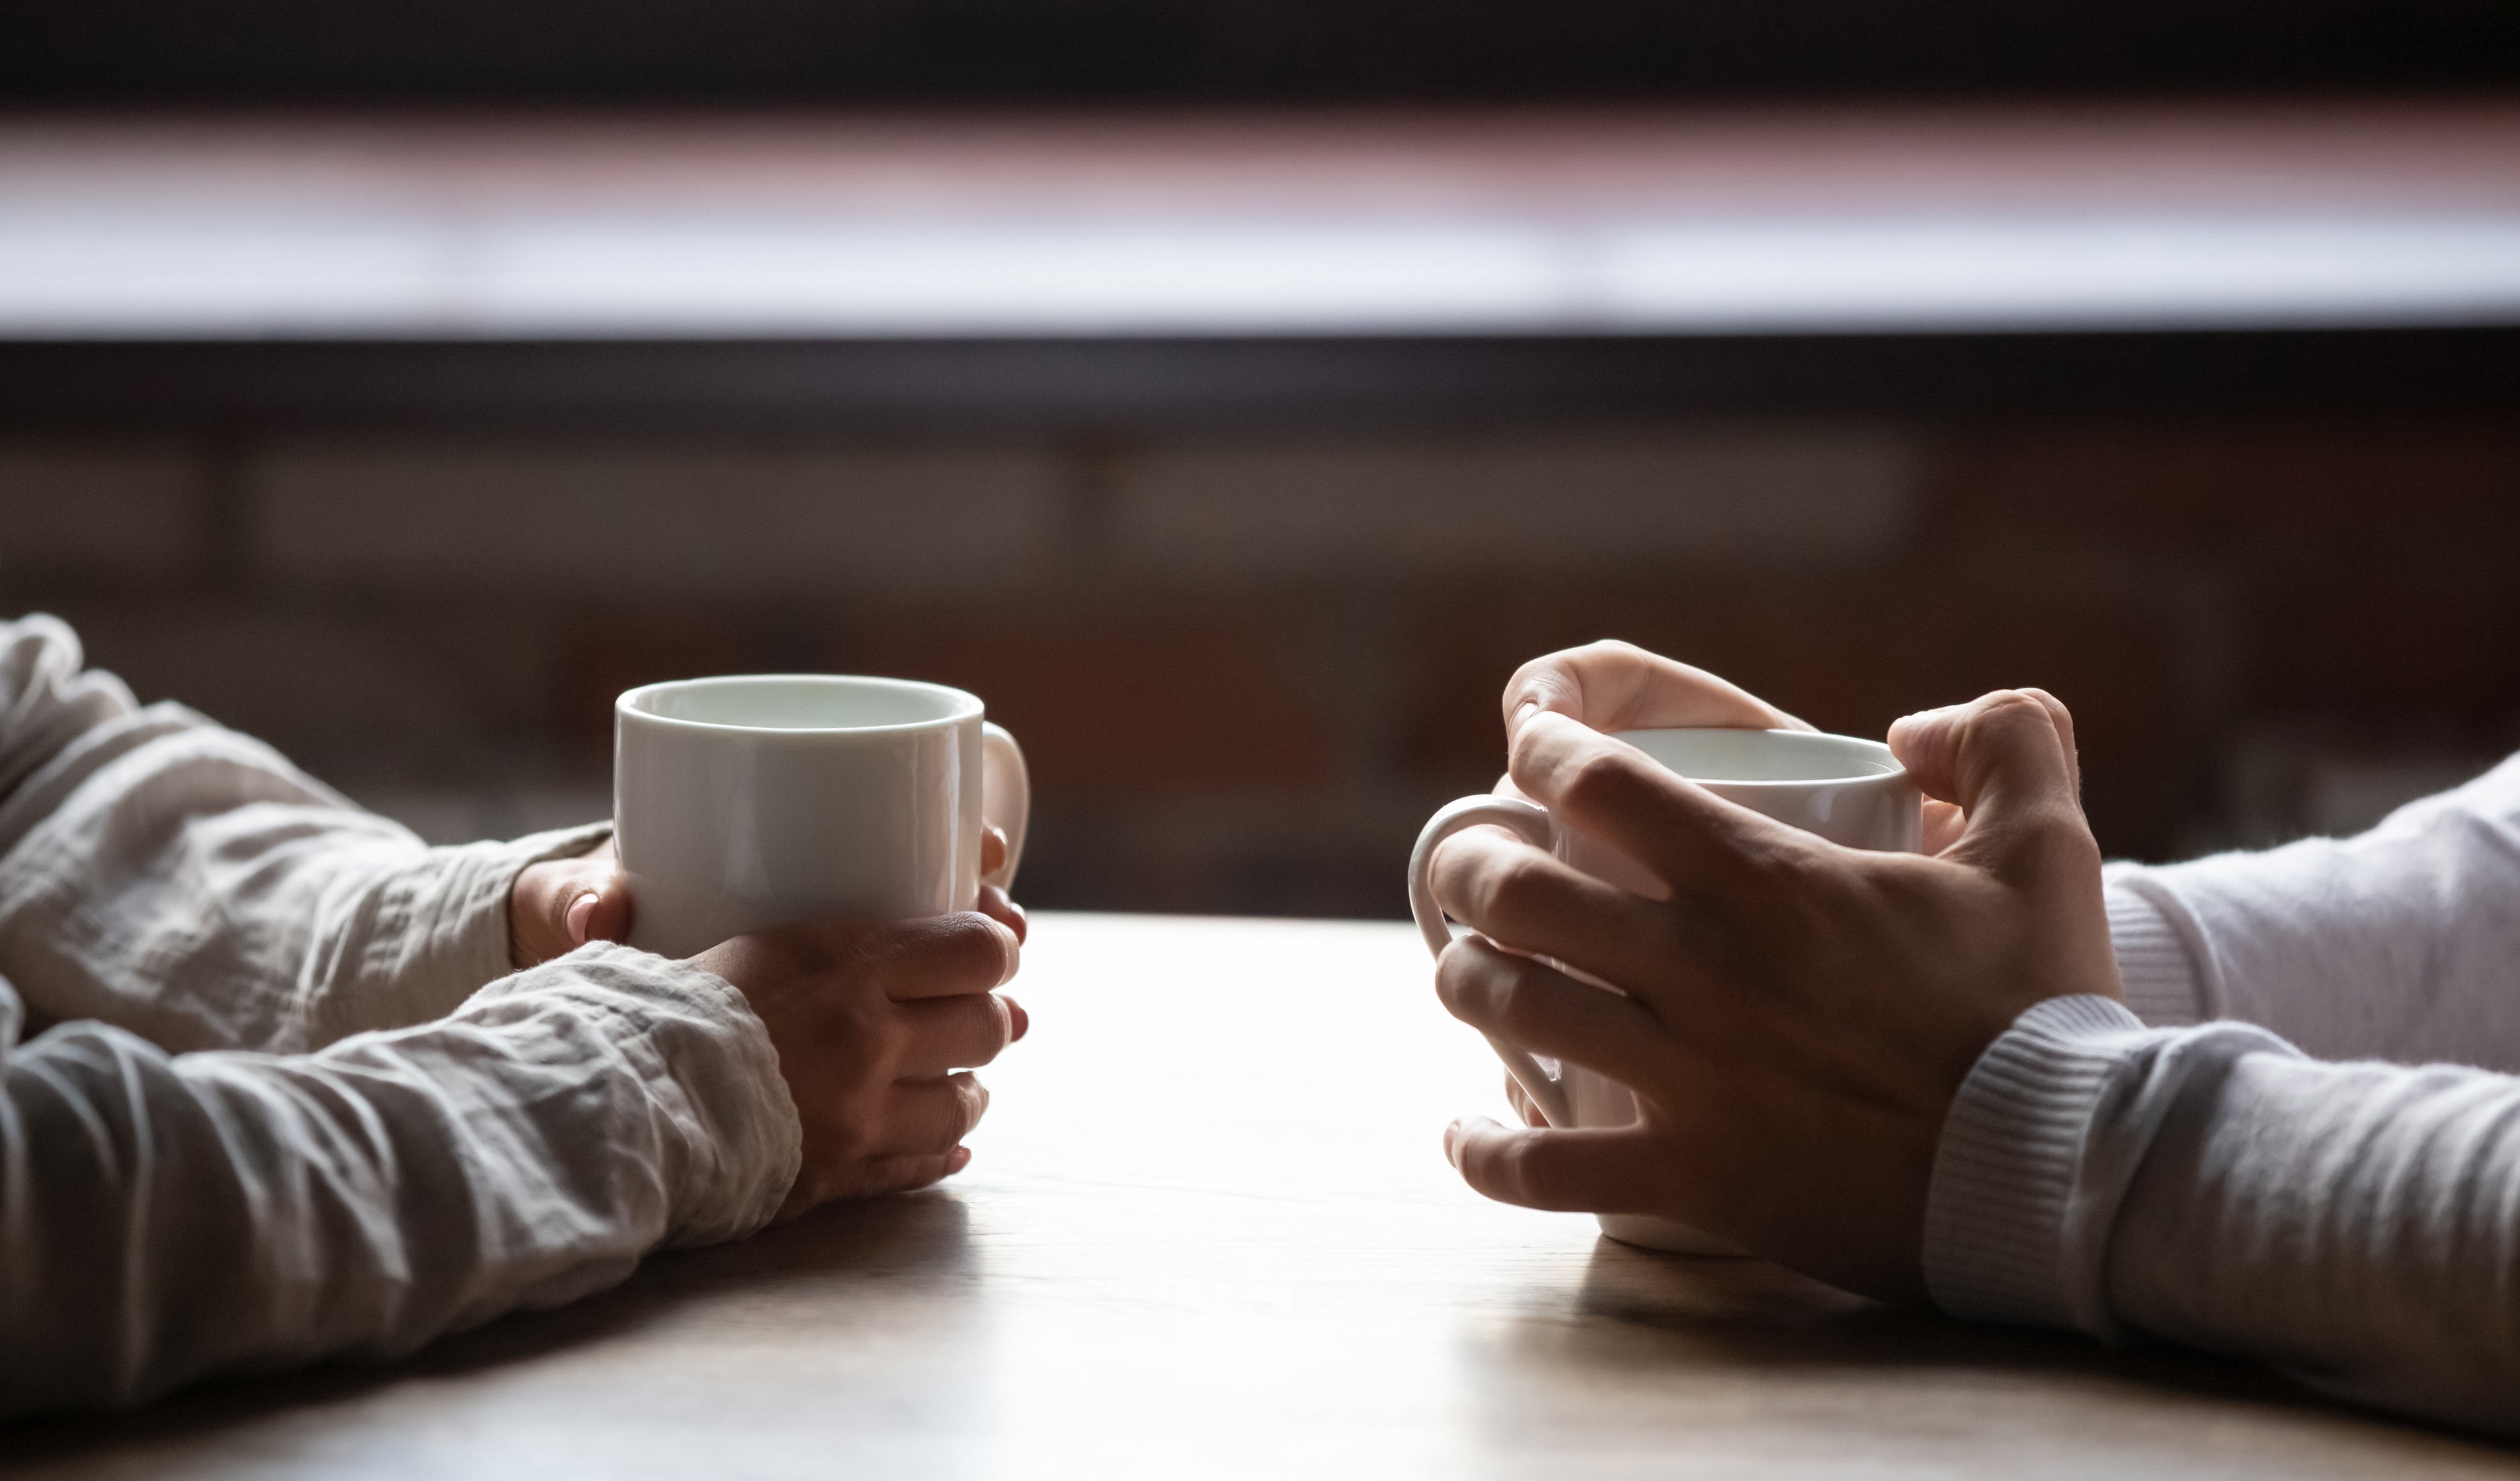 Two people holding mugs across from each other